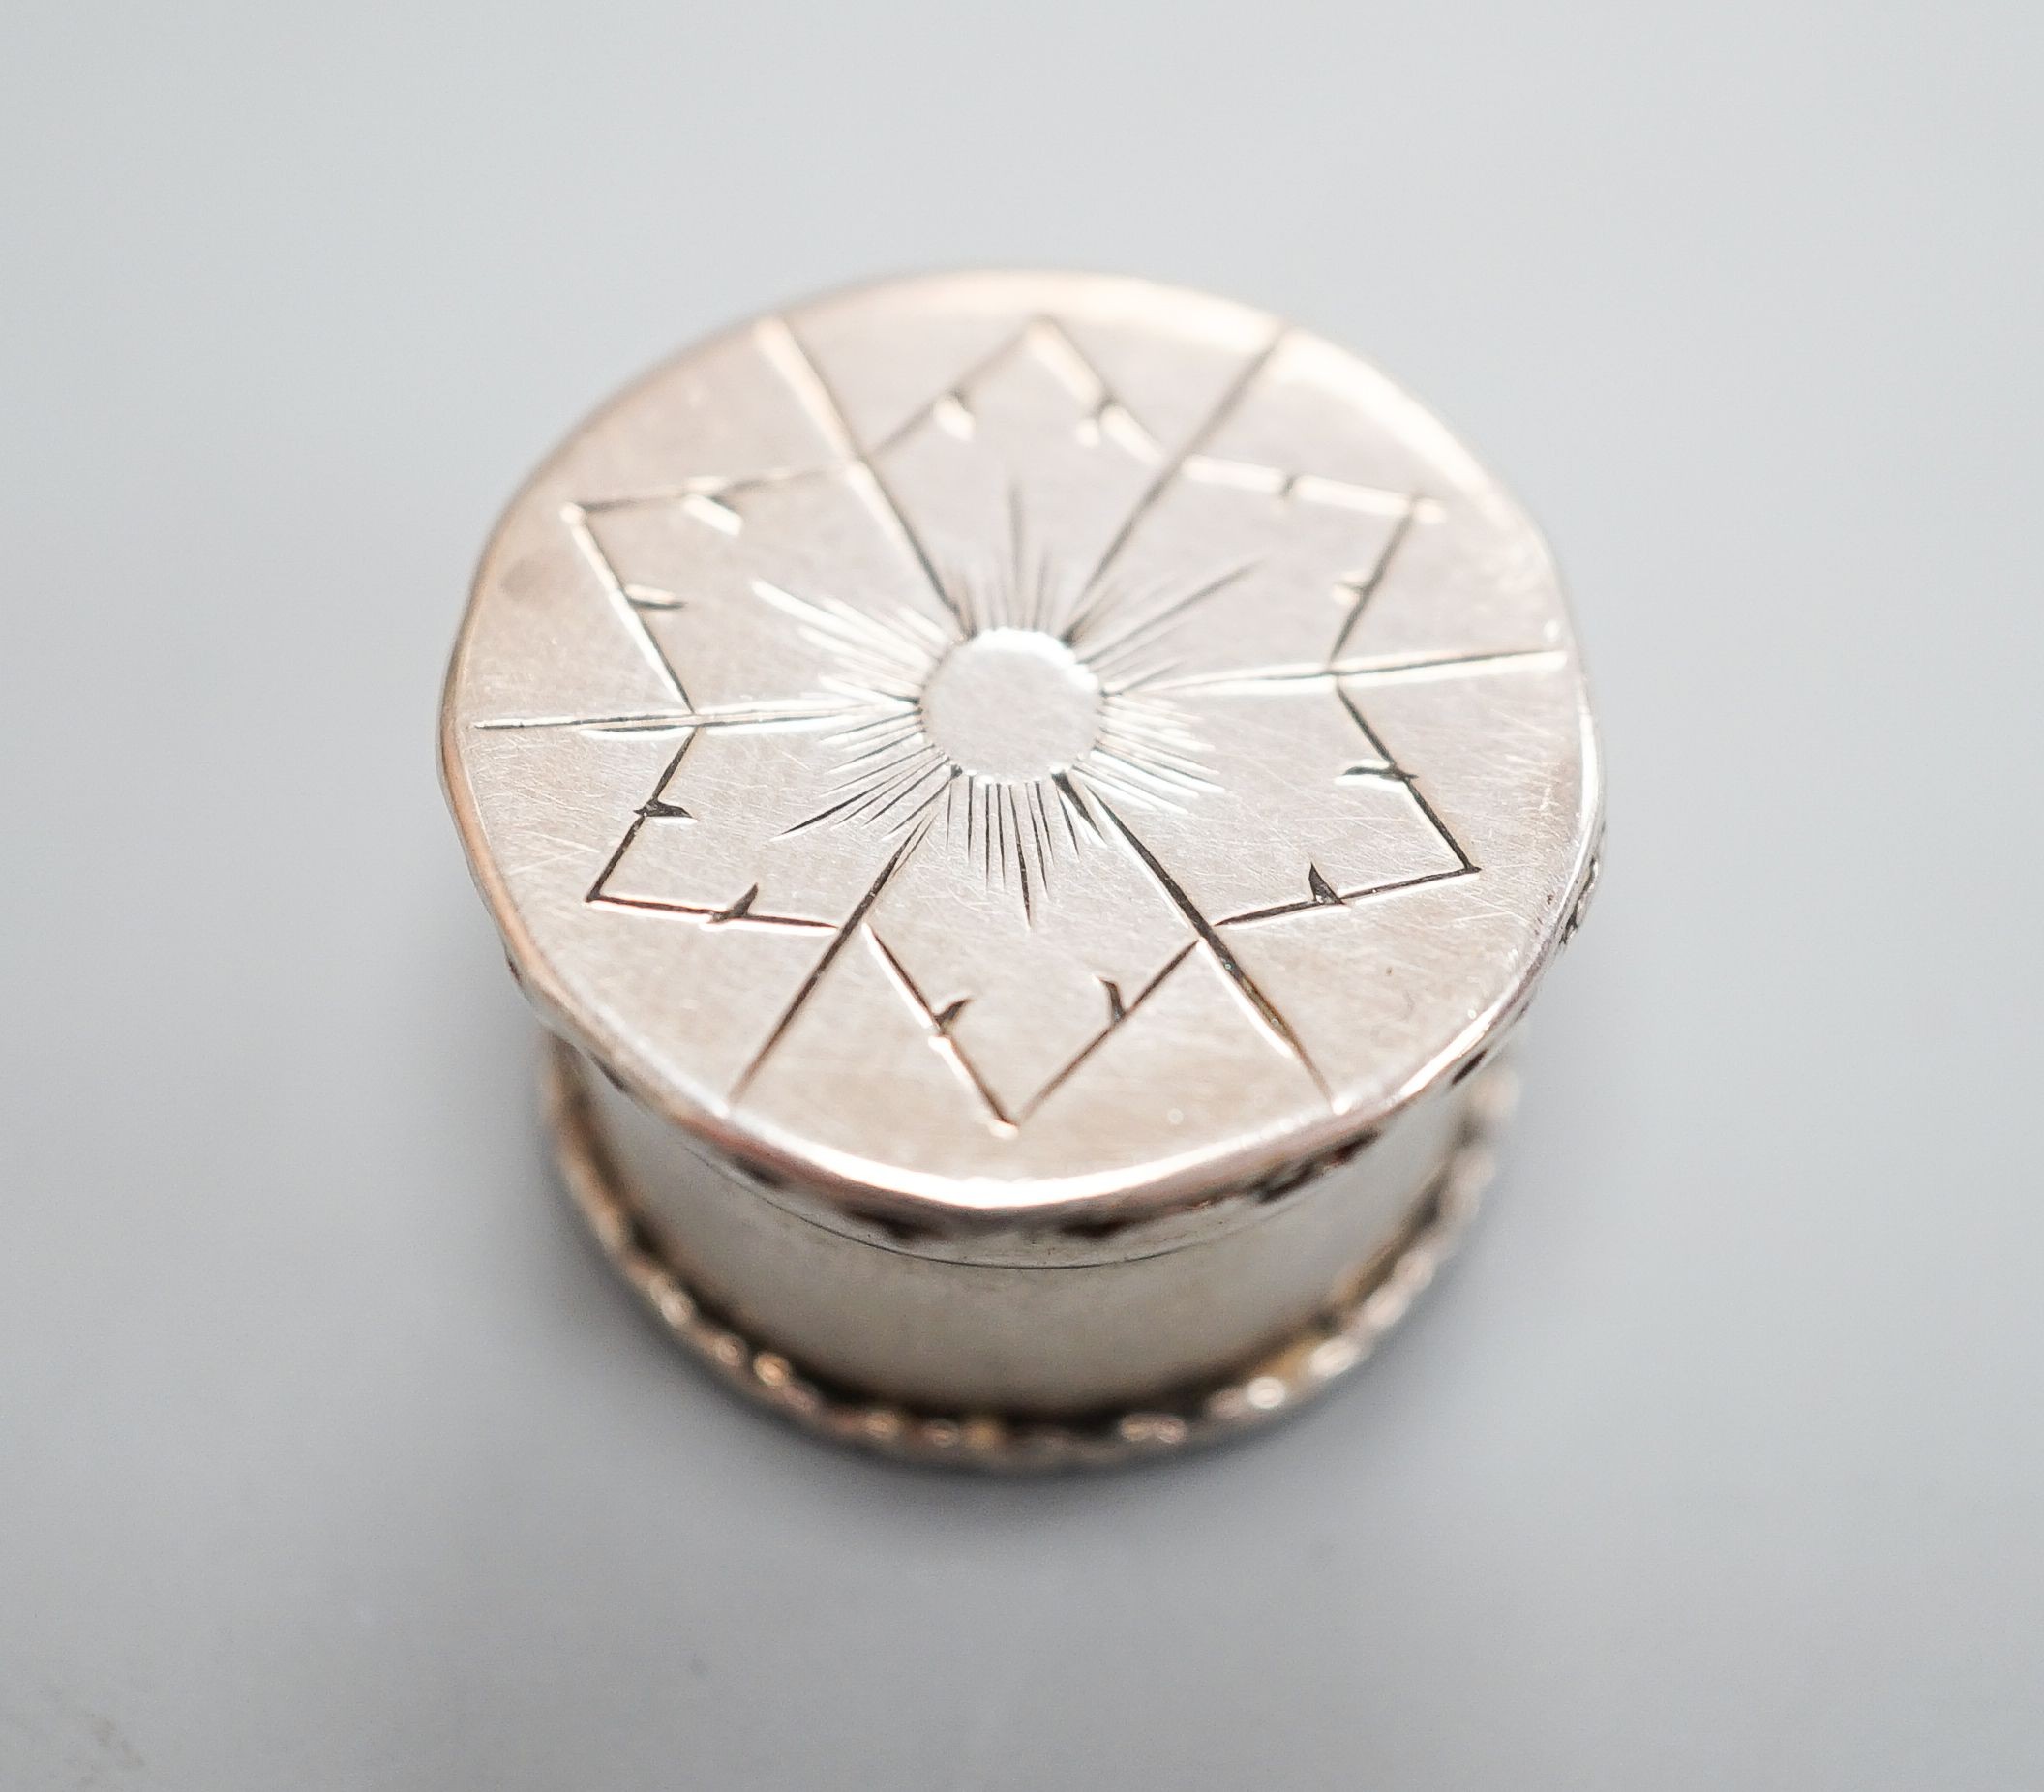 A mid 18th century German? small pill box, with engraved flower head decoration, 19mm.